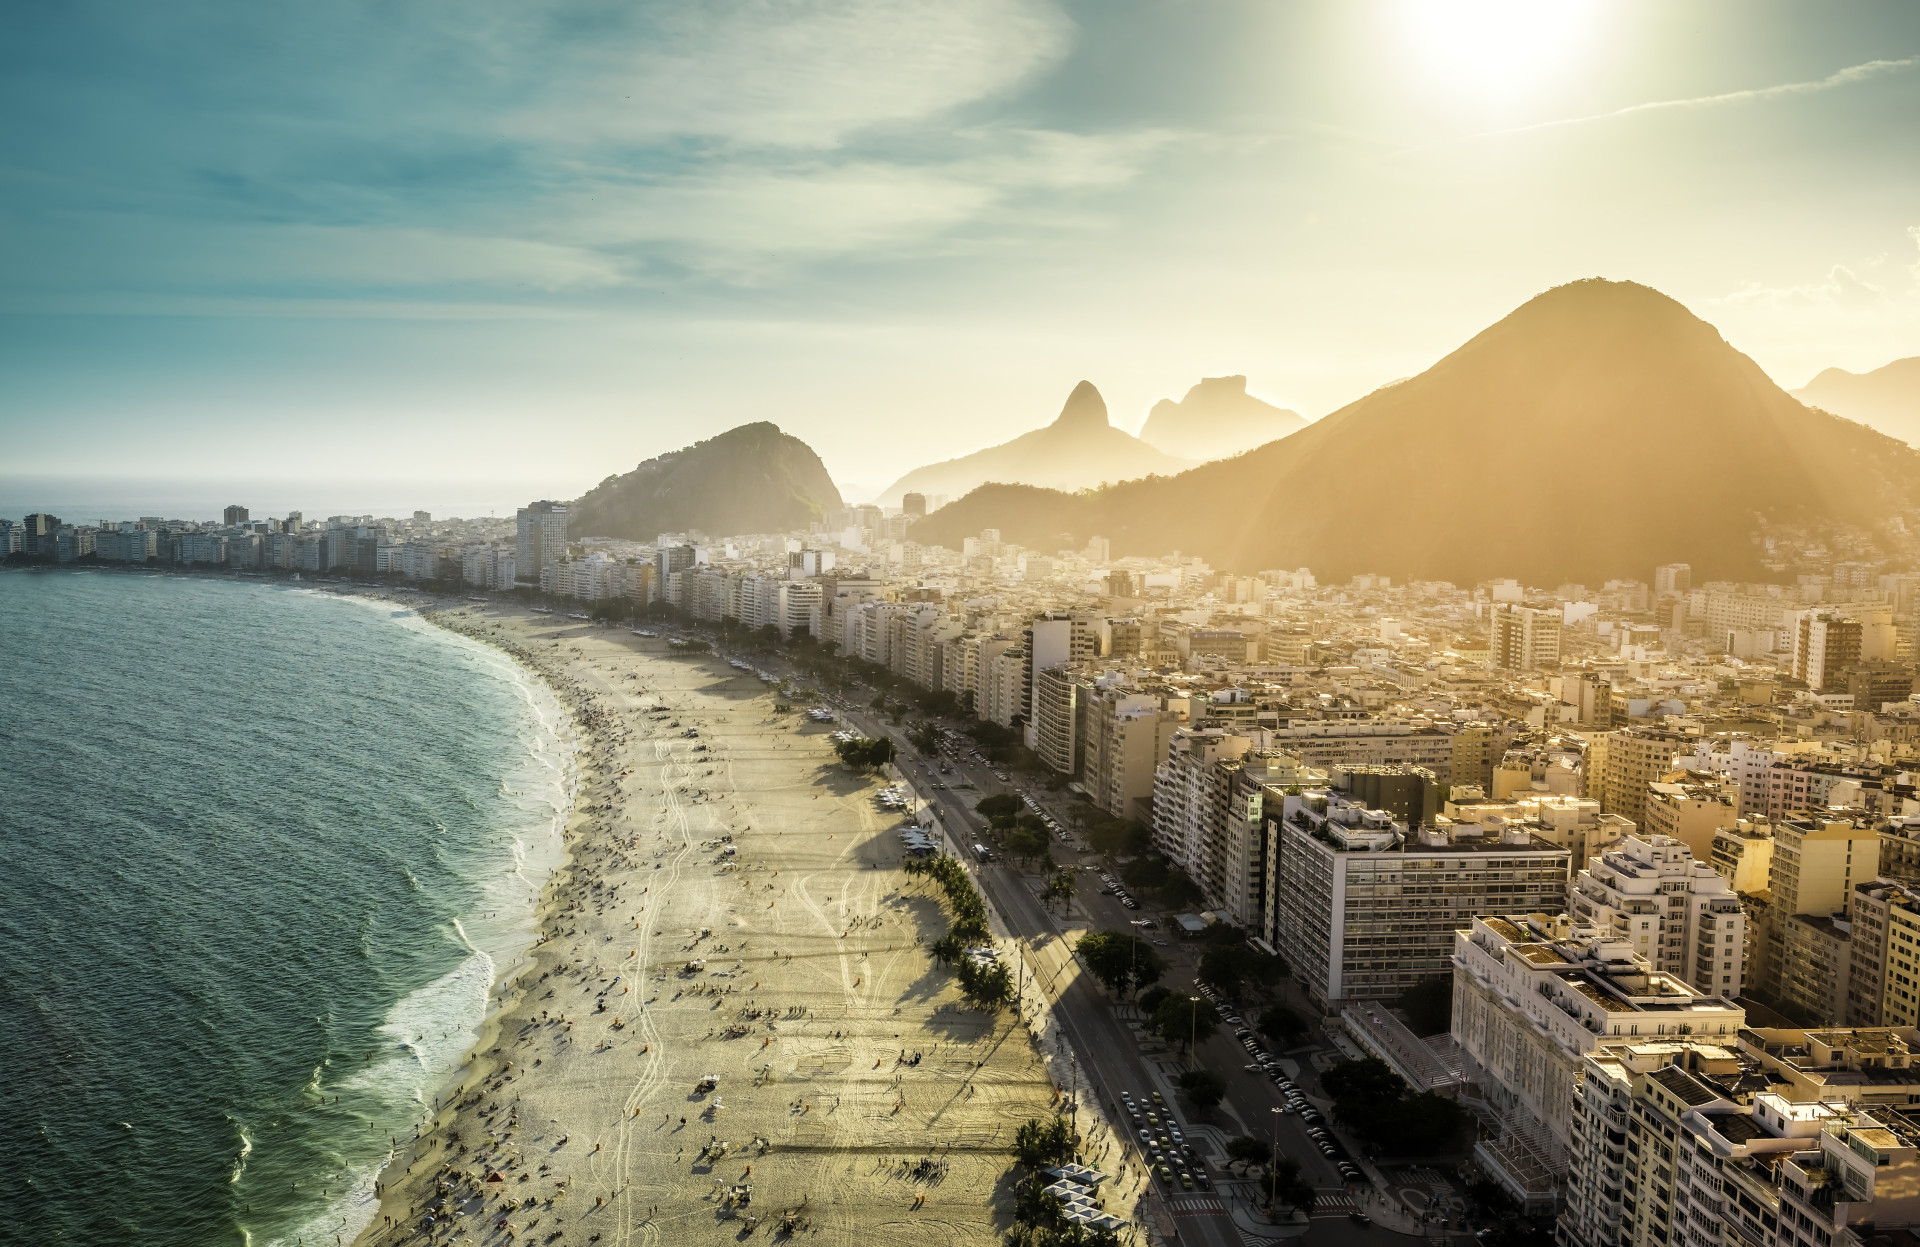 In Brazil, Copacabana is the name of the most famous neighborhood in Rio de Janeiro. It attracts tourists from all over the world. There you can go for a stroll along the promenade, or go for a swim in Rio's most popular beach.